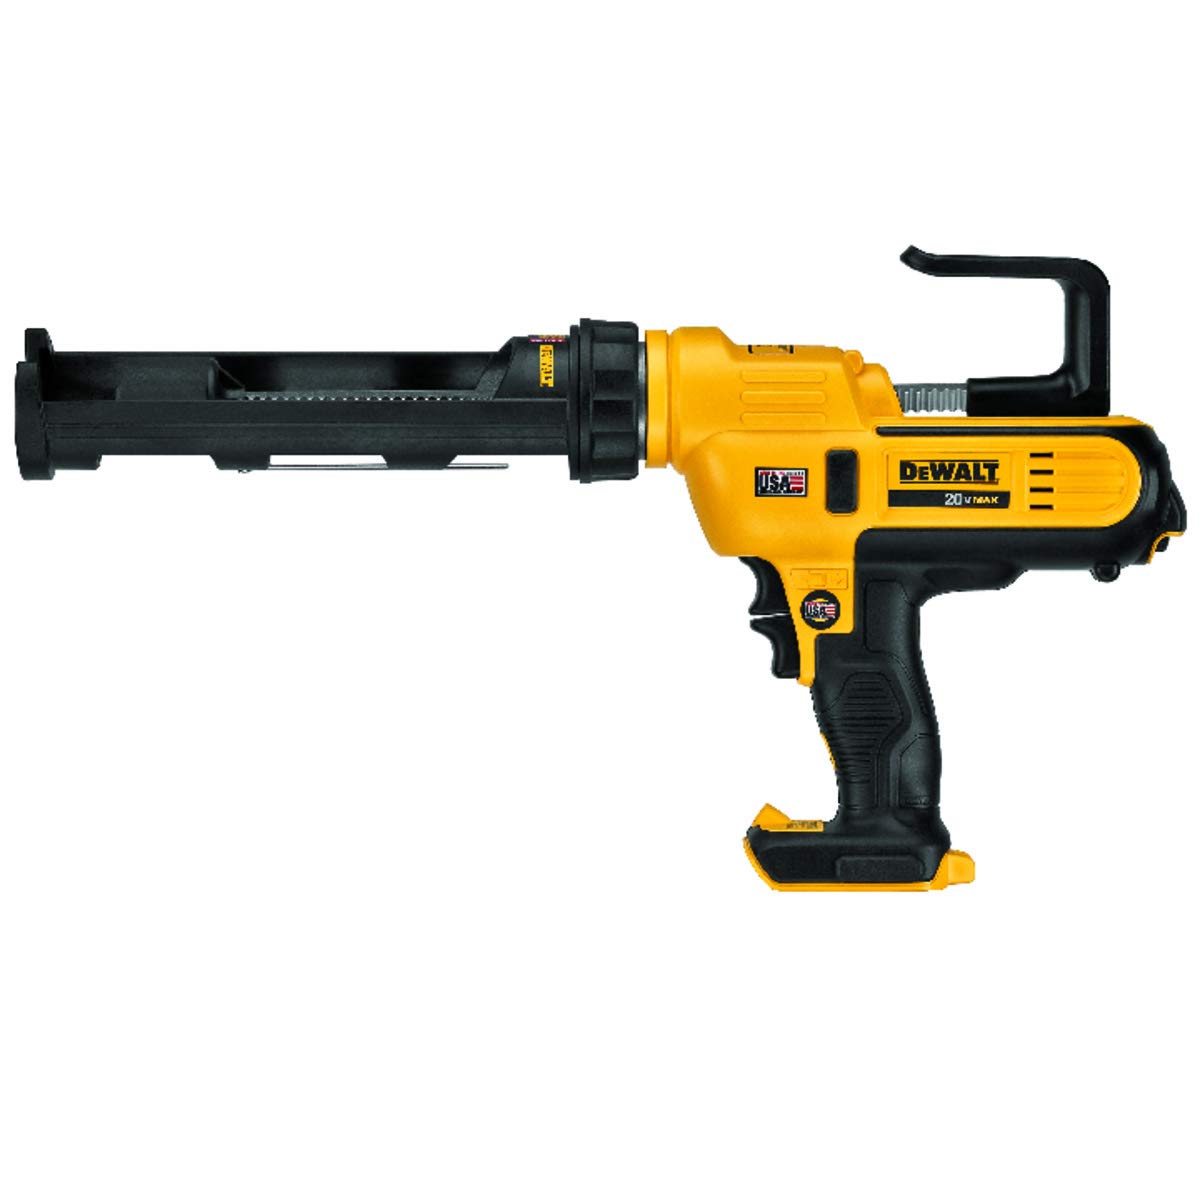 DEWALT 20V MAX Caulking Gun, Cordless, 10oz, Variable Speed Trigger, Interchangeable Canister Trays, Bare Tool Only (DCE560B)